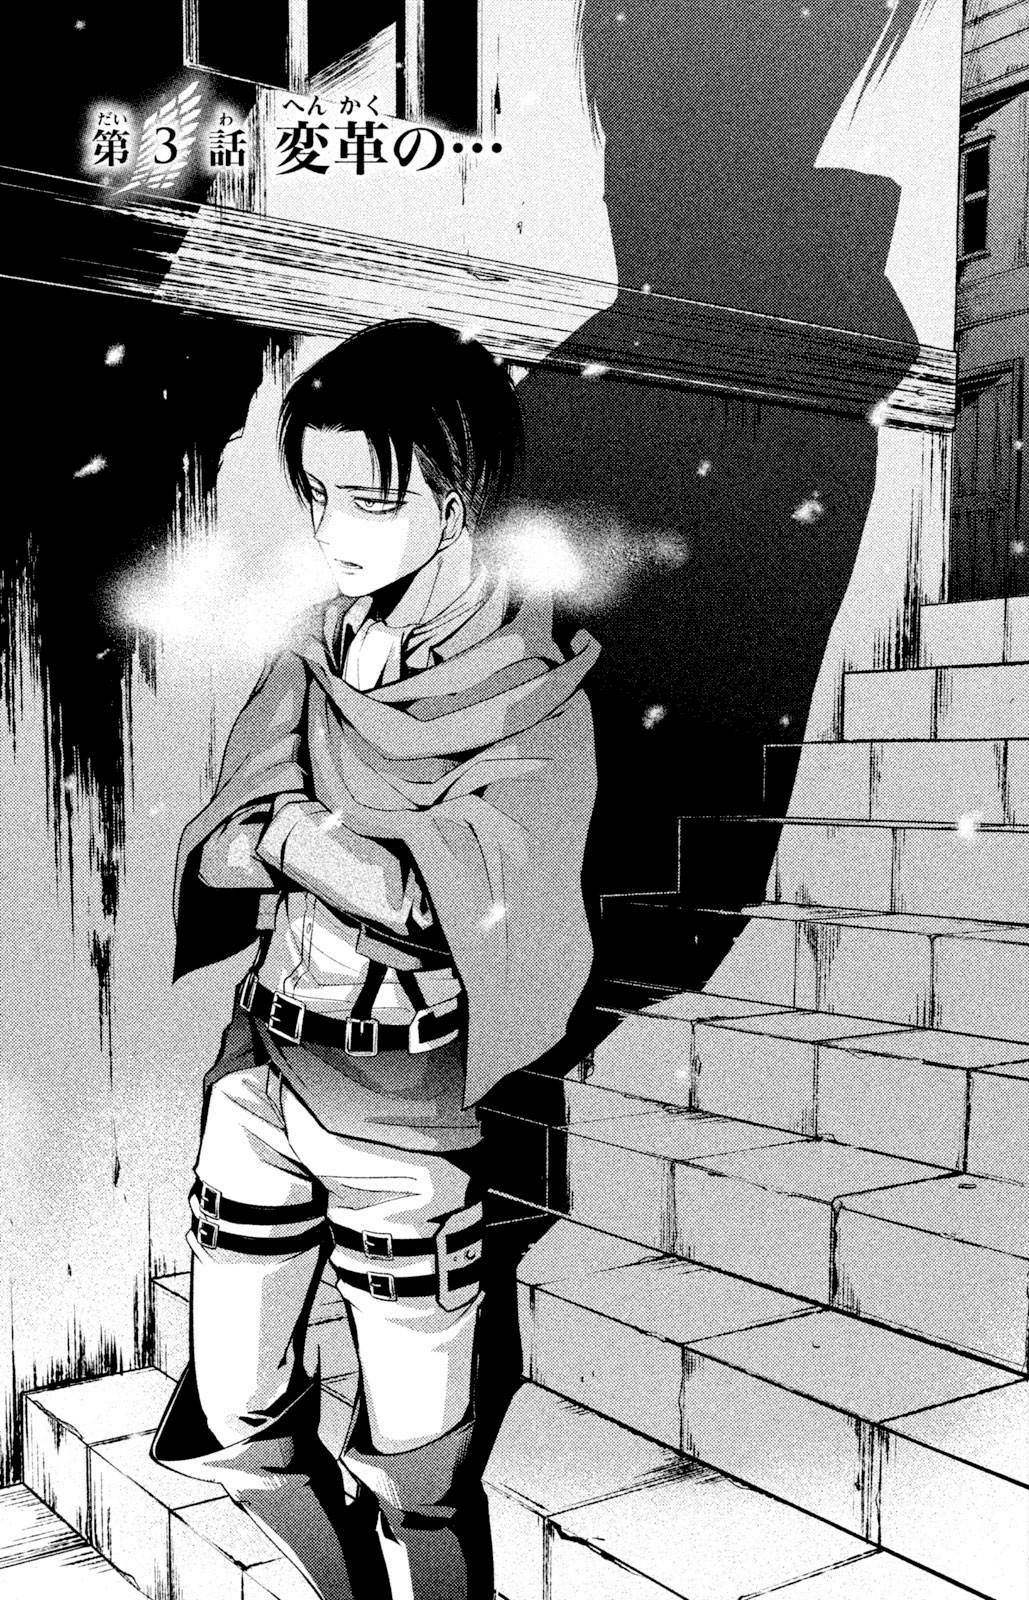 A Choice with No Regrets: Part Two, Attack on Titan Wiki